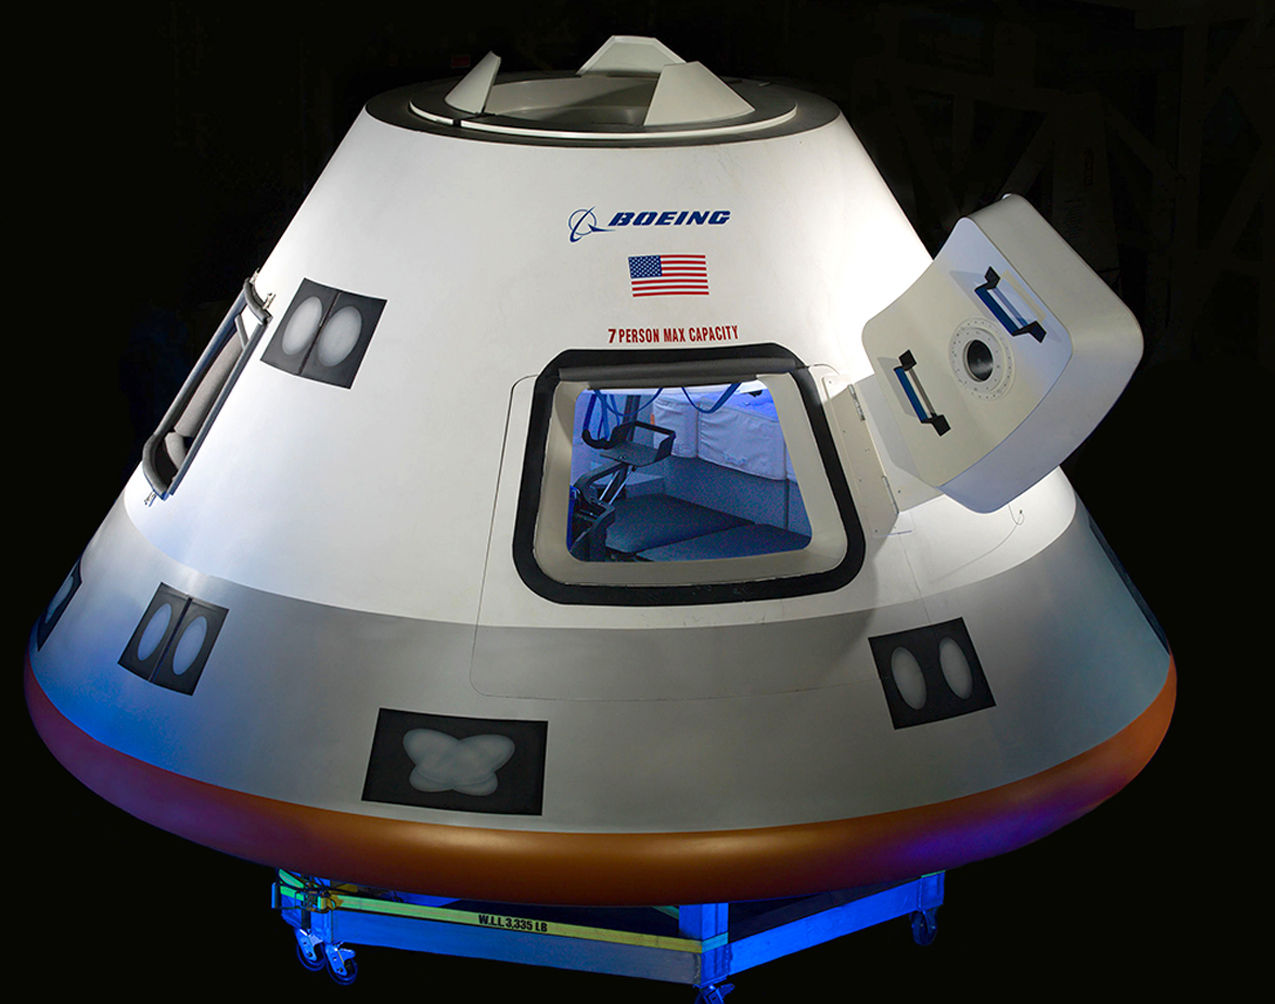 Boeing’s CST100 Starliner A 21st Century Space Capsule in Photos Space